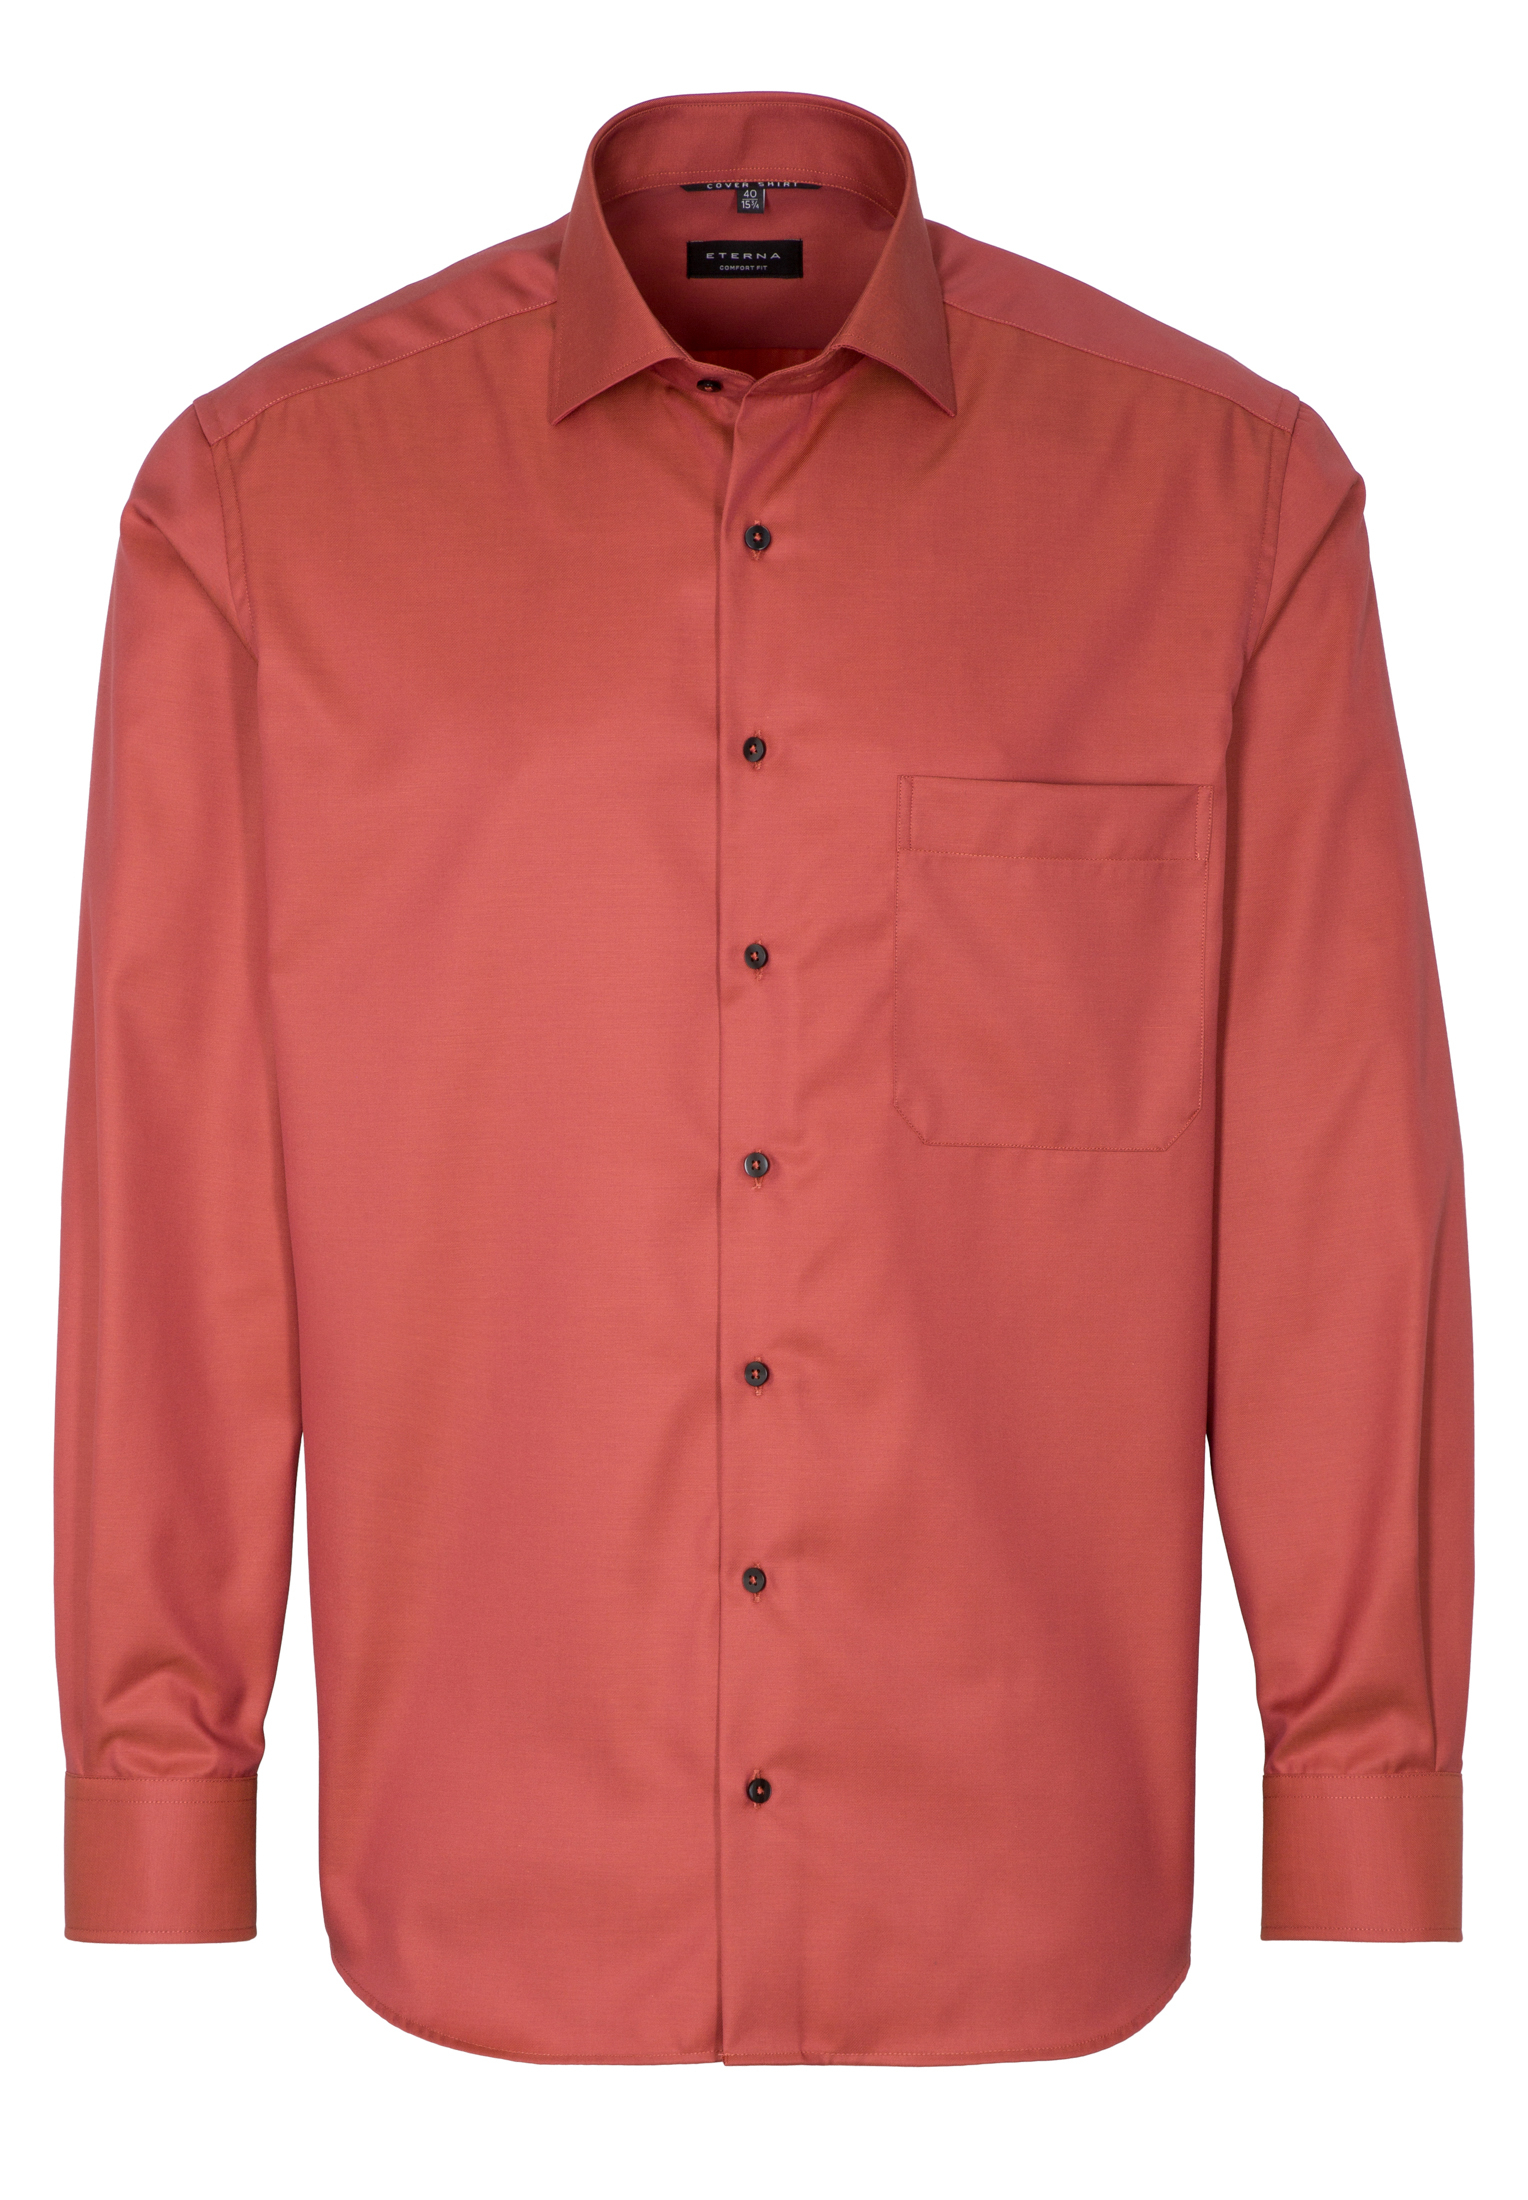 COMFORT FIT Cover Shirt in red plain